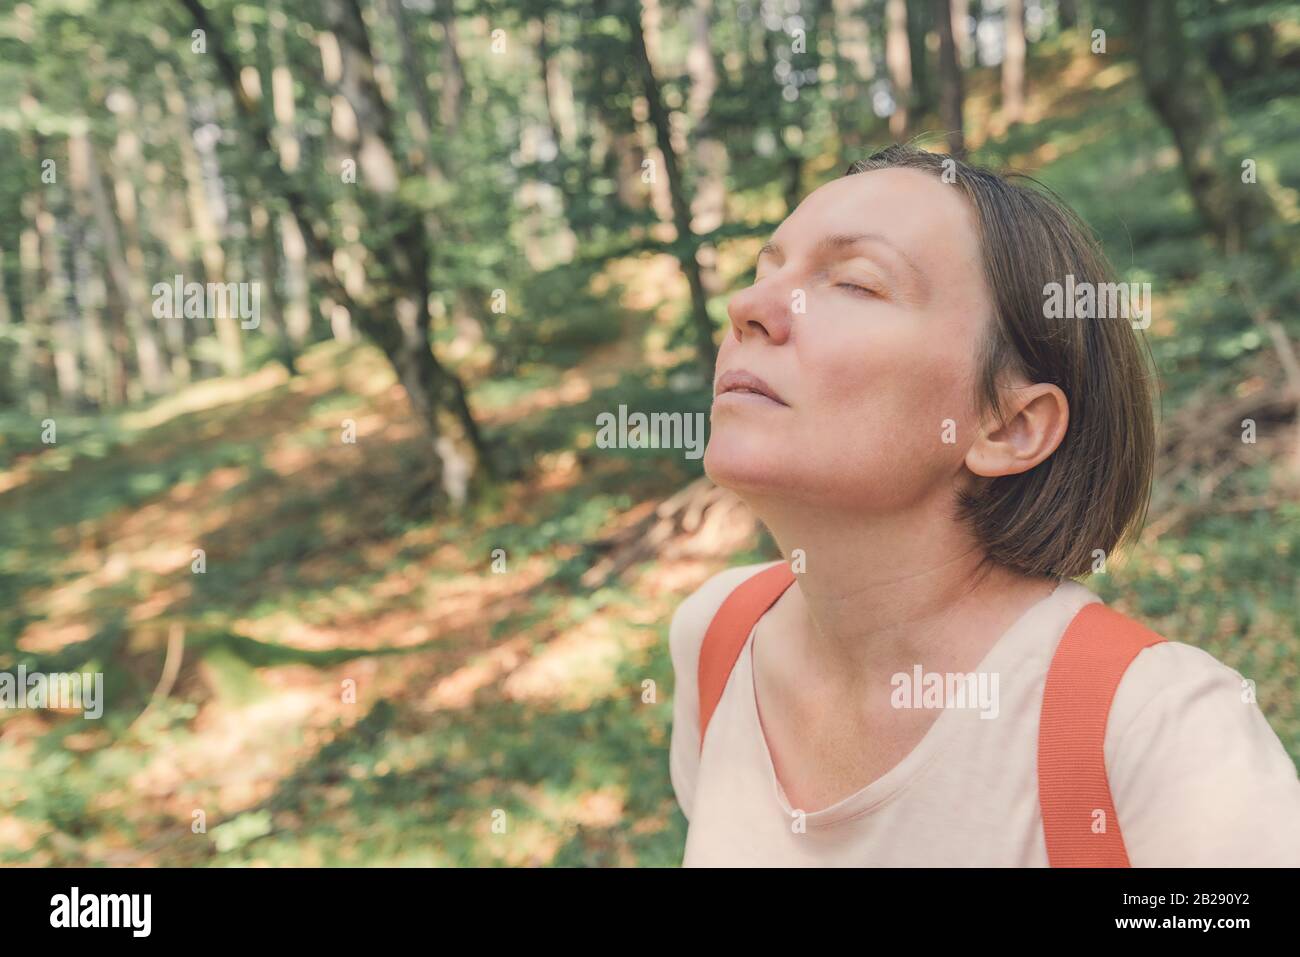 Female hiker taking breath of fresh air in forest and enjoying relaxing walk through woods Stock Photo